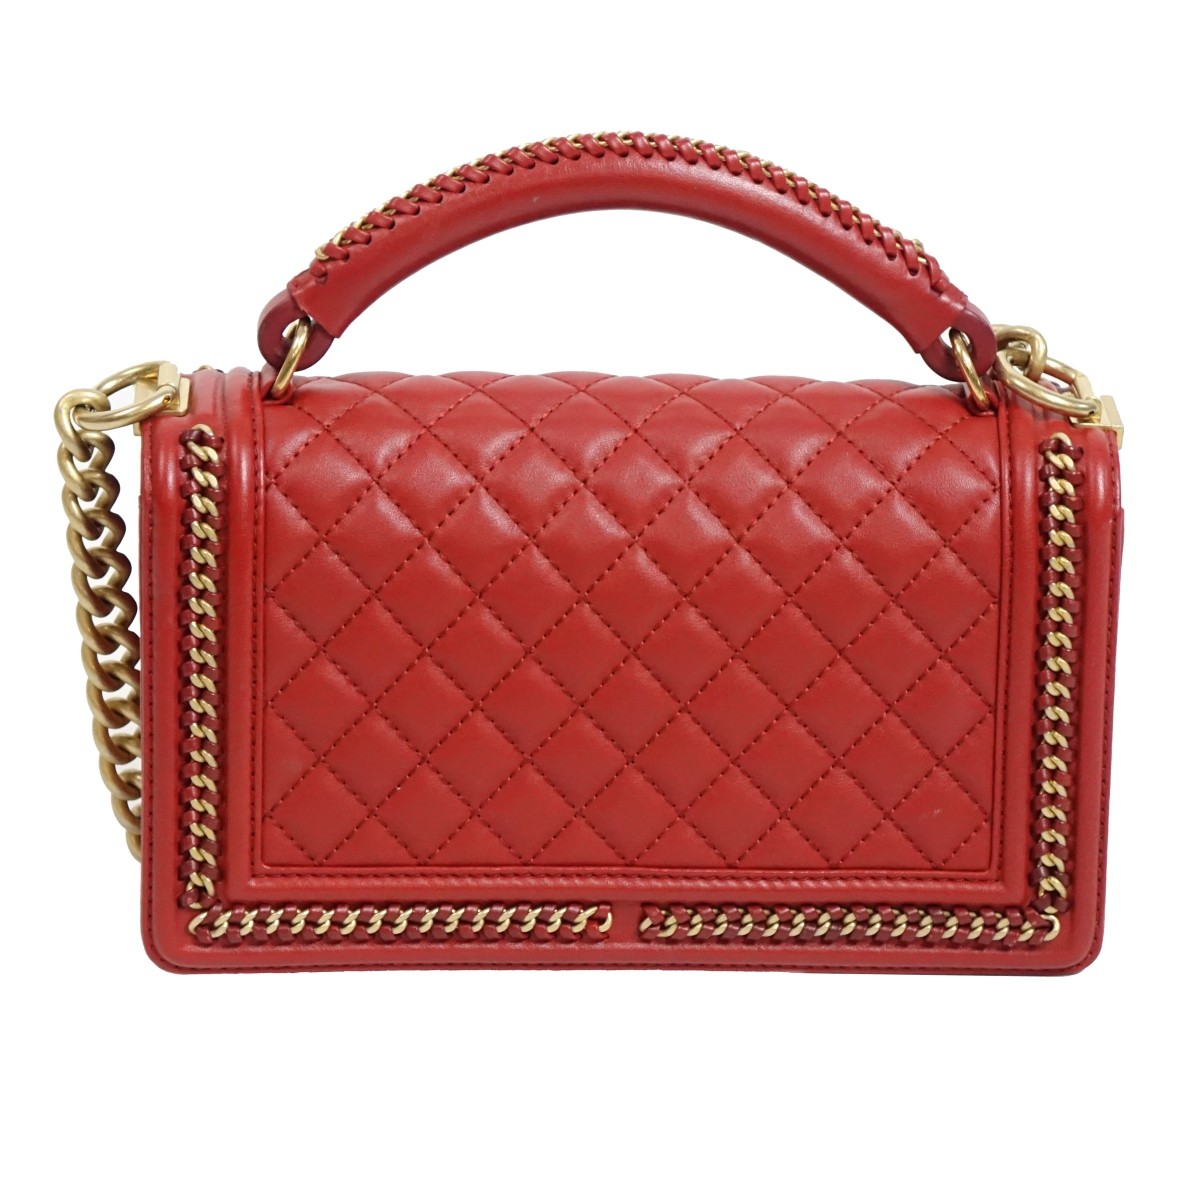 Chanel Red Quilted Calfskin Leather Handbag